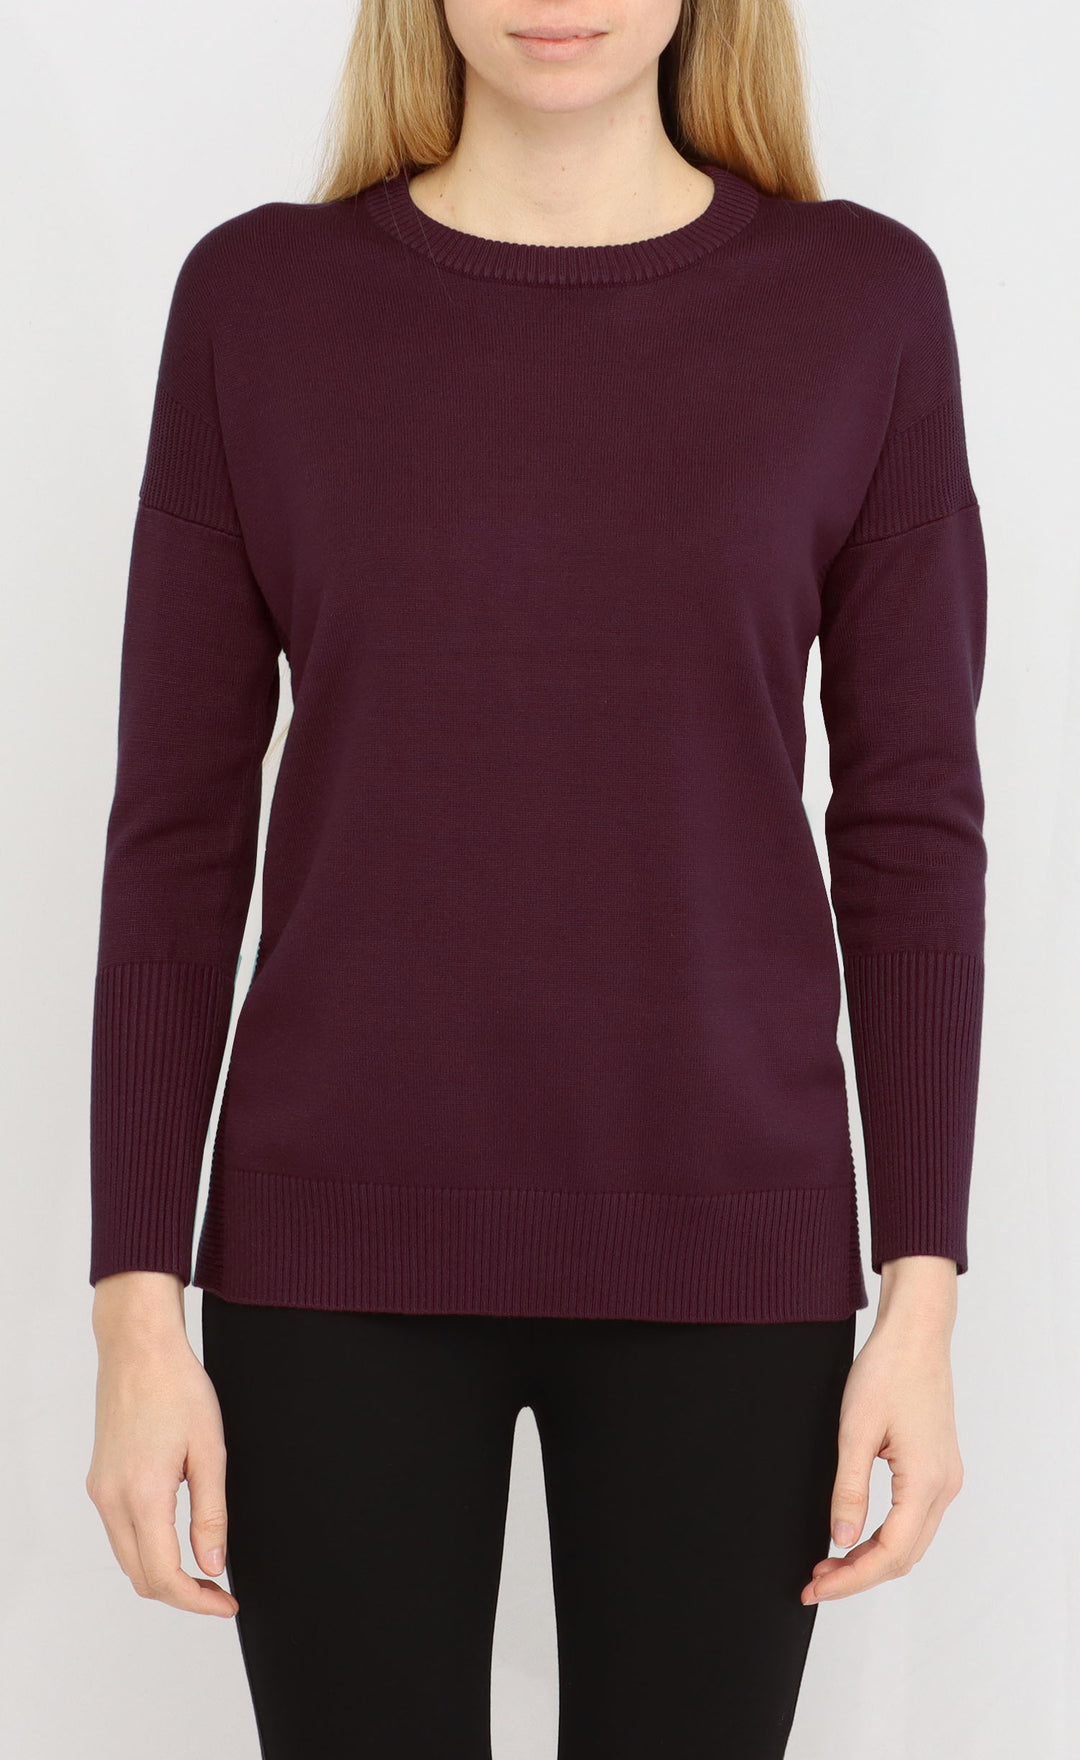 KNIT CREW LONG SLEEVE TOP